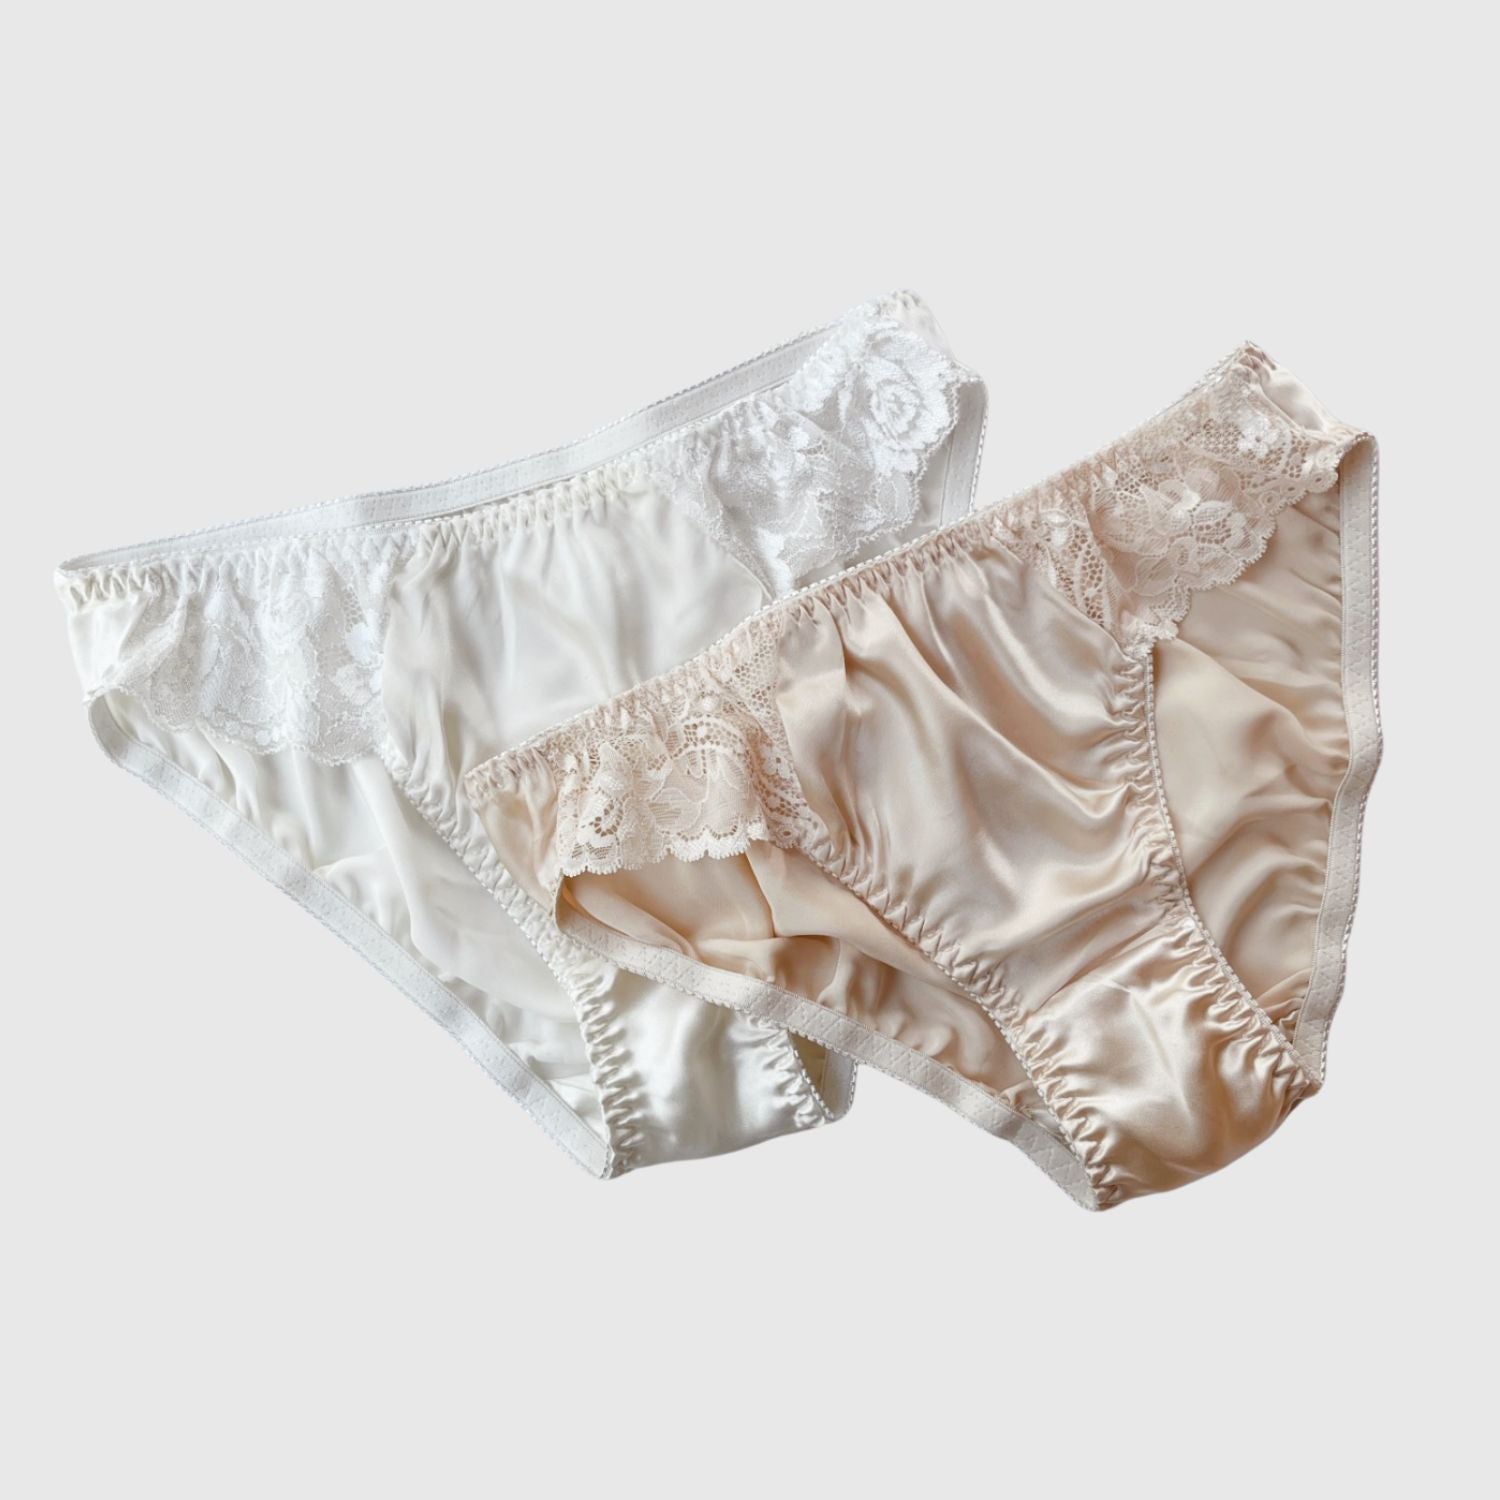 Photo of Lacy Underwear on Silky Fabric